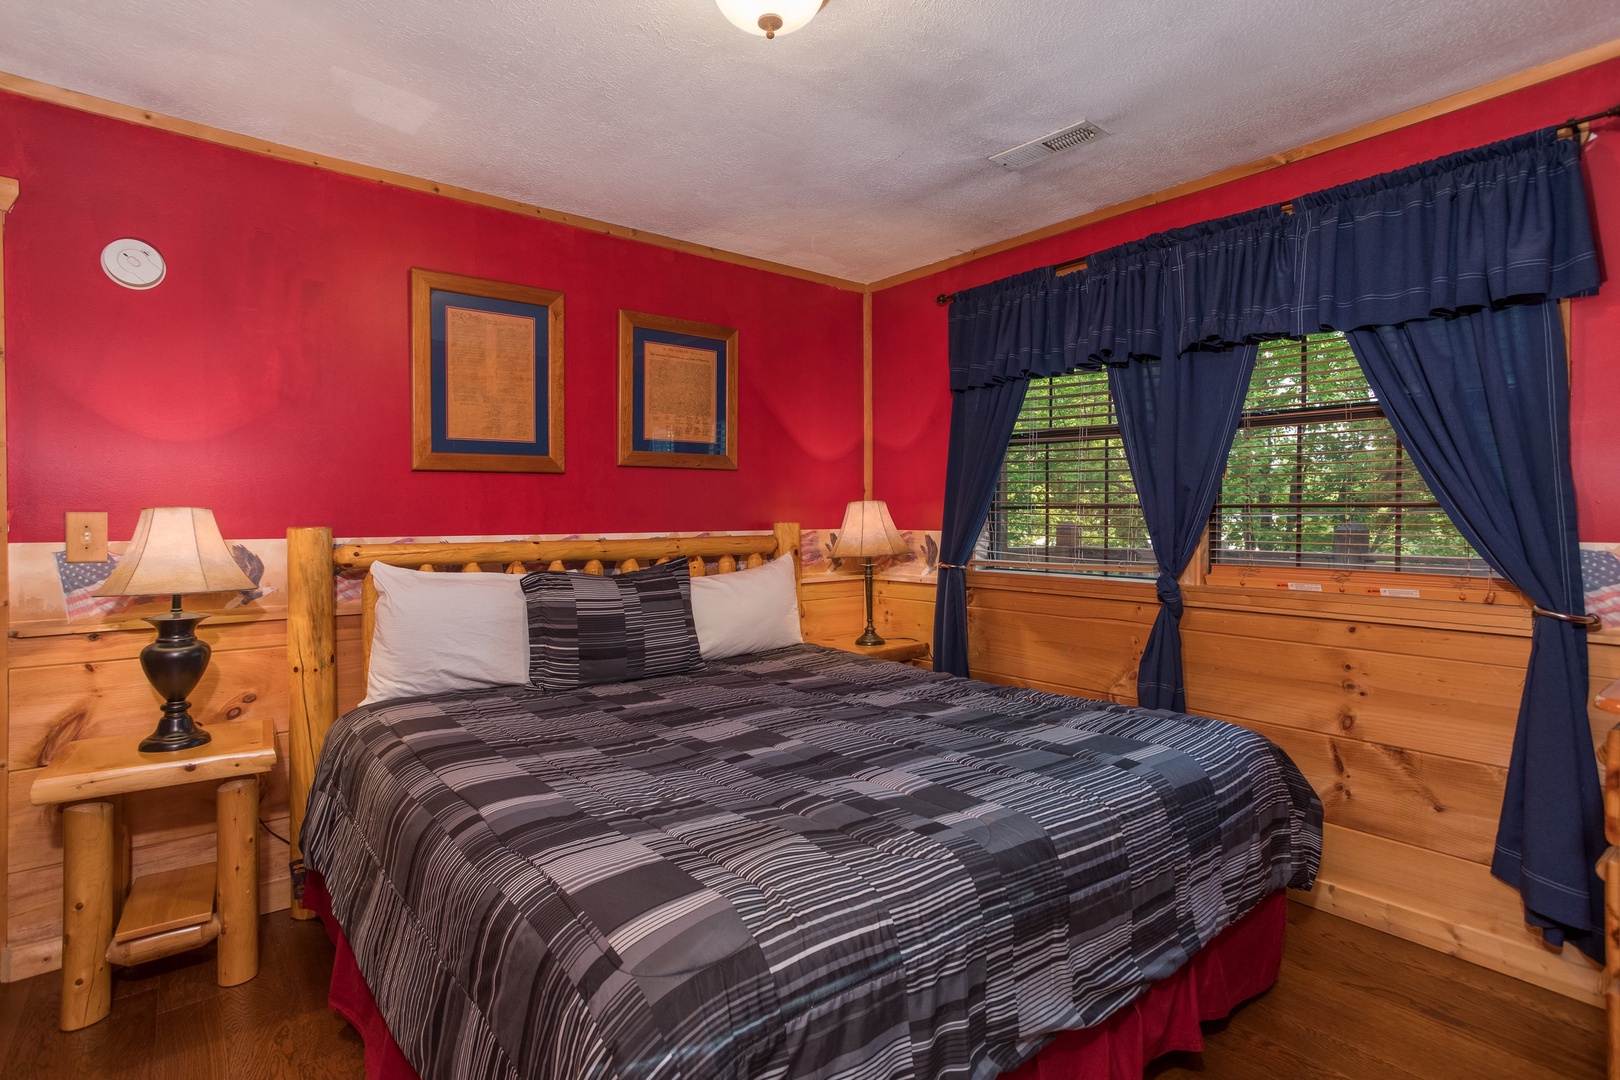 Bedroom with a king bed at Patriot Pointe, a 5 bedroom cabin rental located in Pigeon Forge